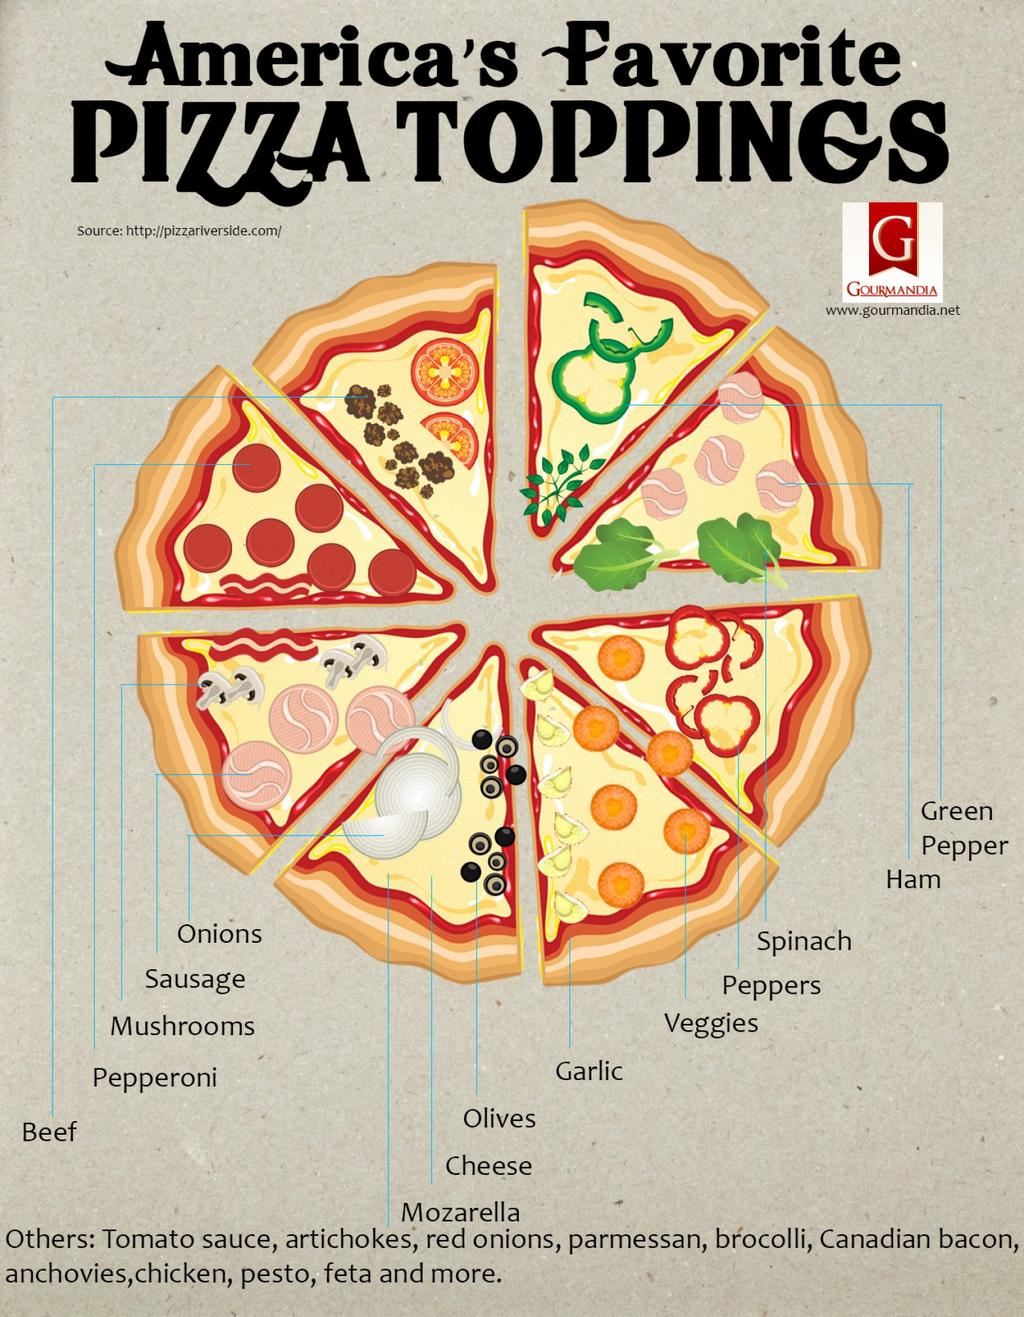 Example Pick 5 toppings from a total of 15.